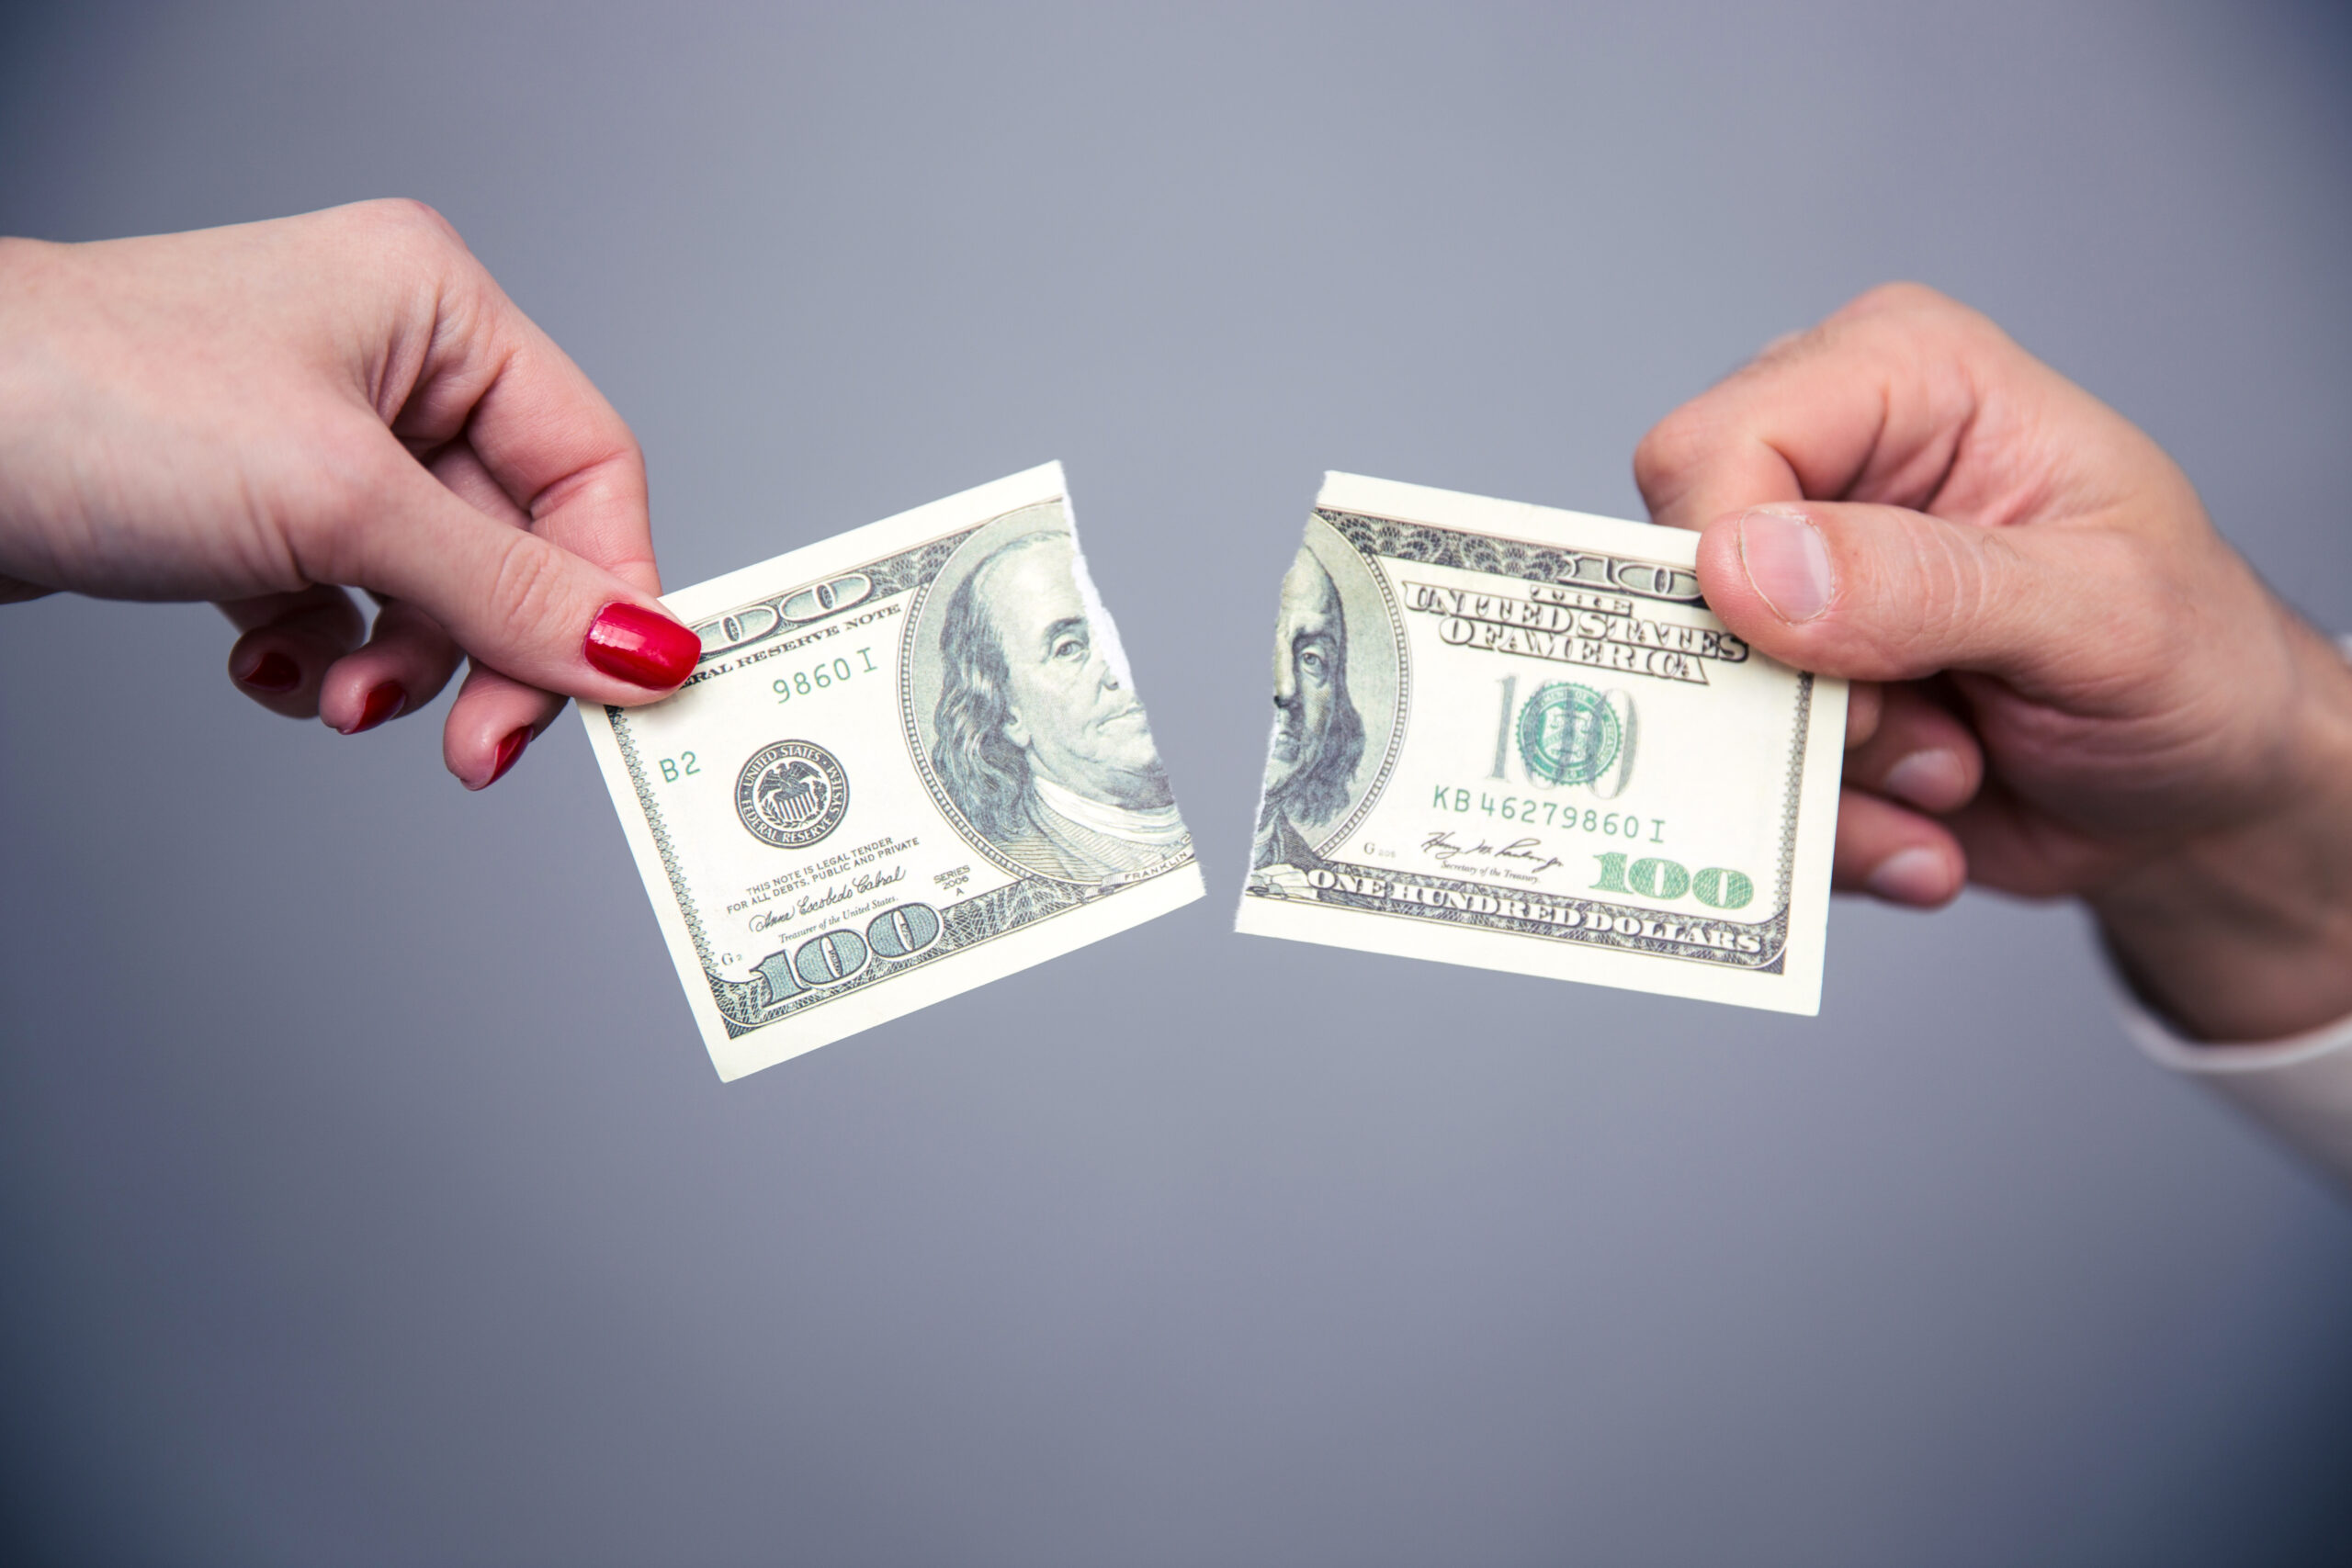 Two hands holding and tearing a hundred-dollar bill, one with red nail polish, against a plain grey background.